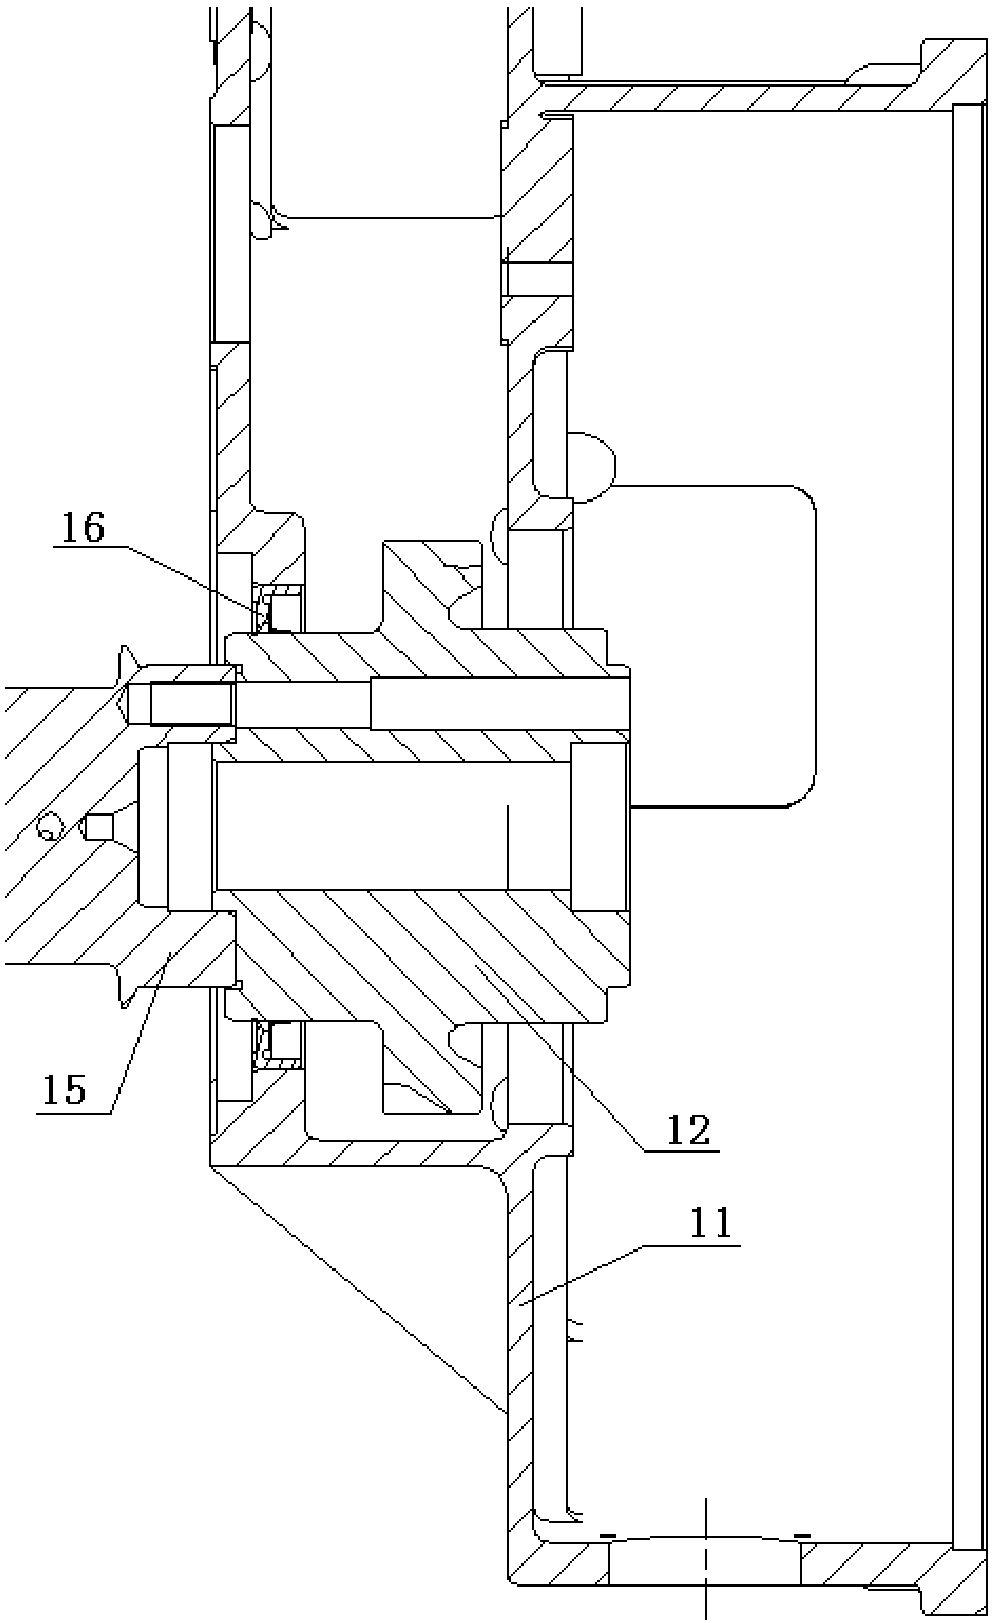 The transmission structure of the additional gear of split crankshaft